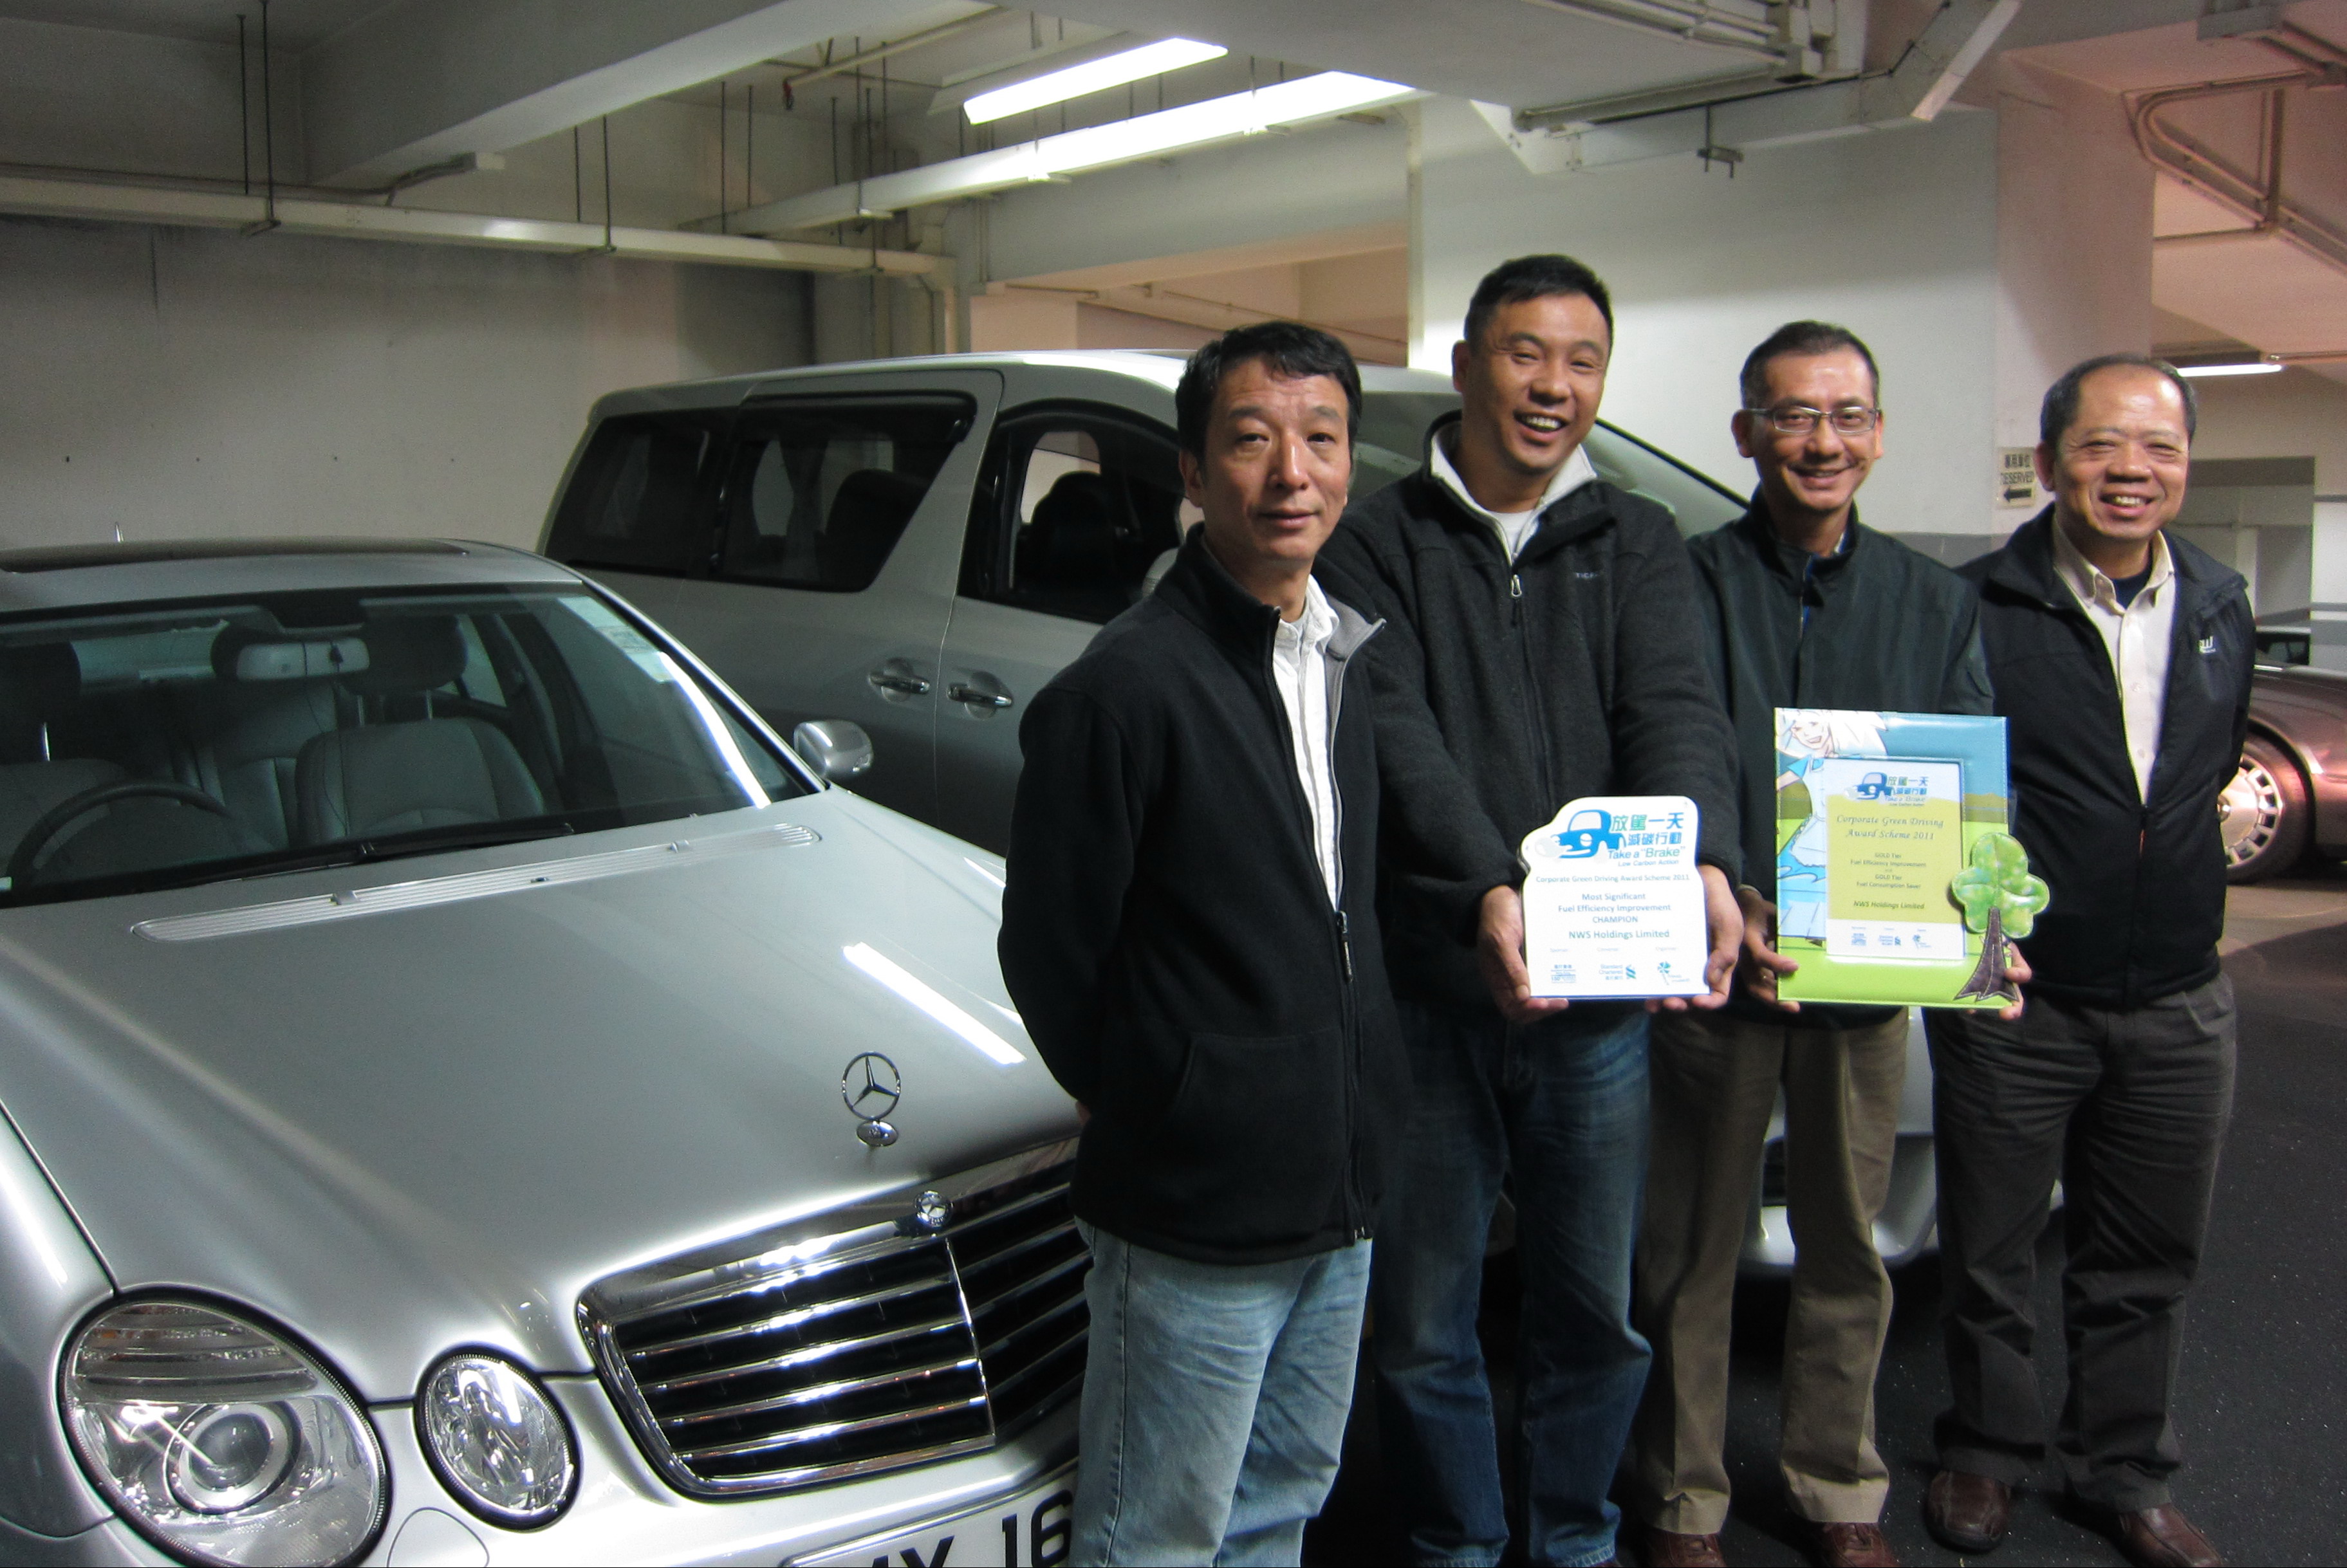 NWS Holdings promotes green driving improving fuel efficiency for over 30% (Chinese version only)